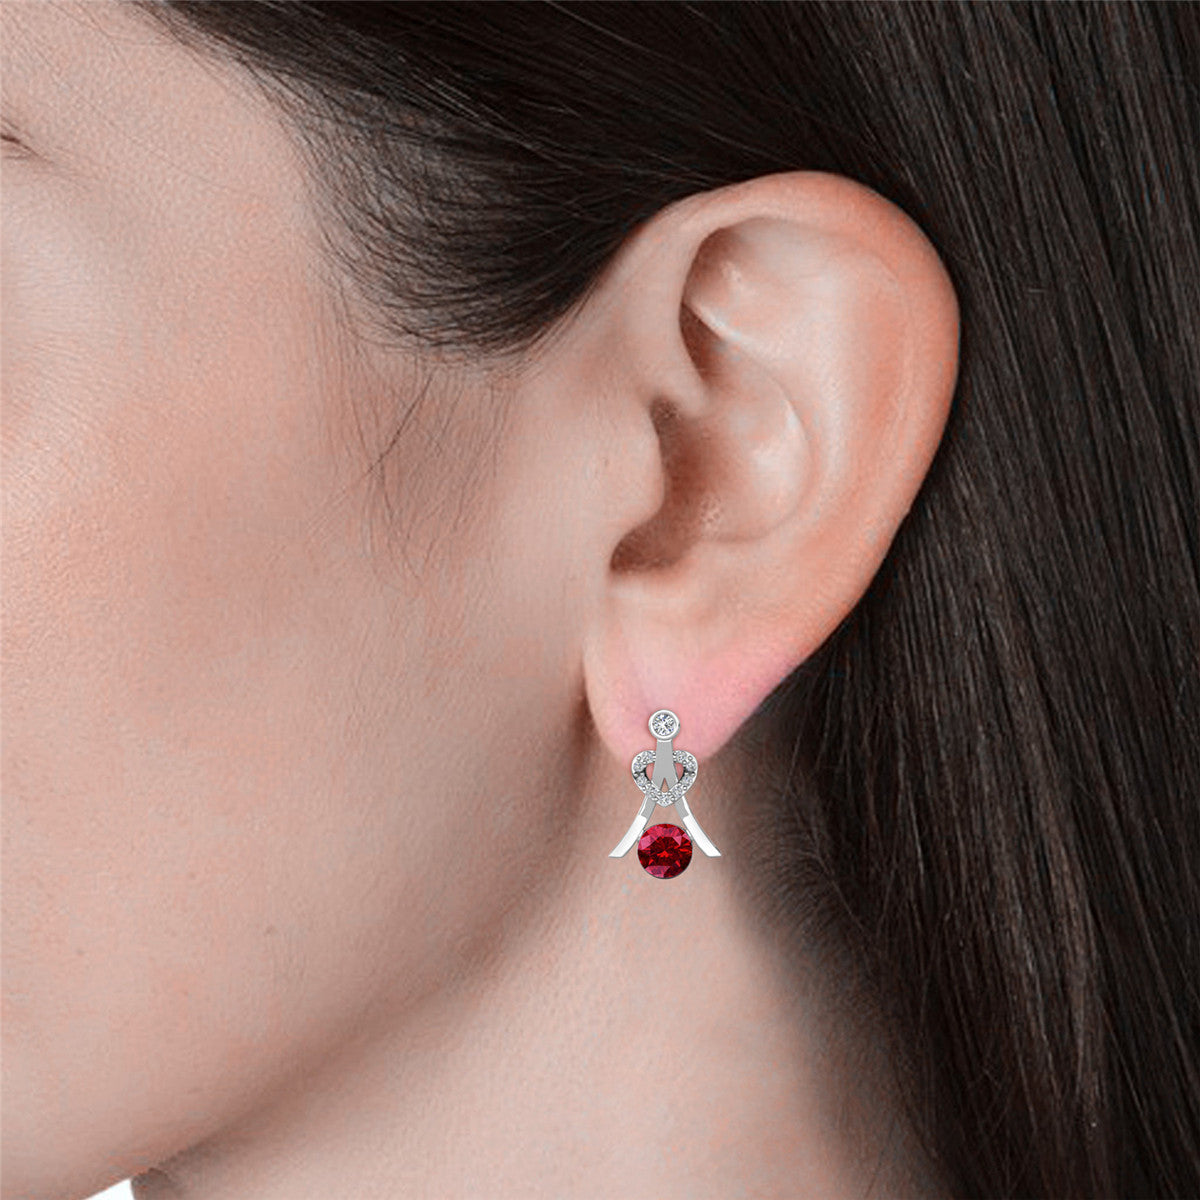 Serenity January Birthstone Garnet Earrings, 18k White Gold Plated Silver Earrings with Round Cut Crystals